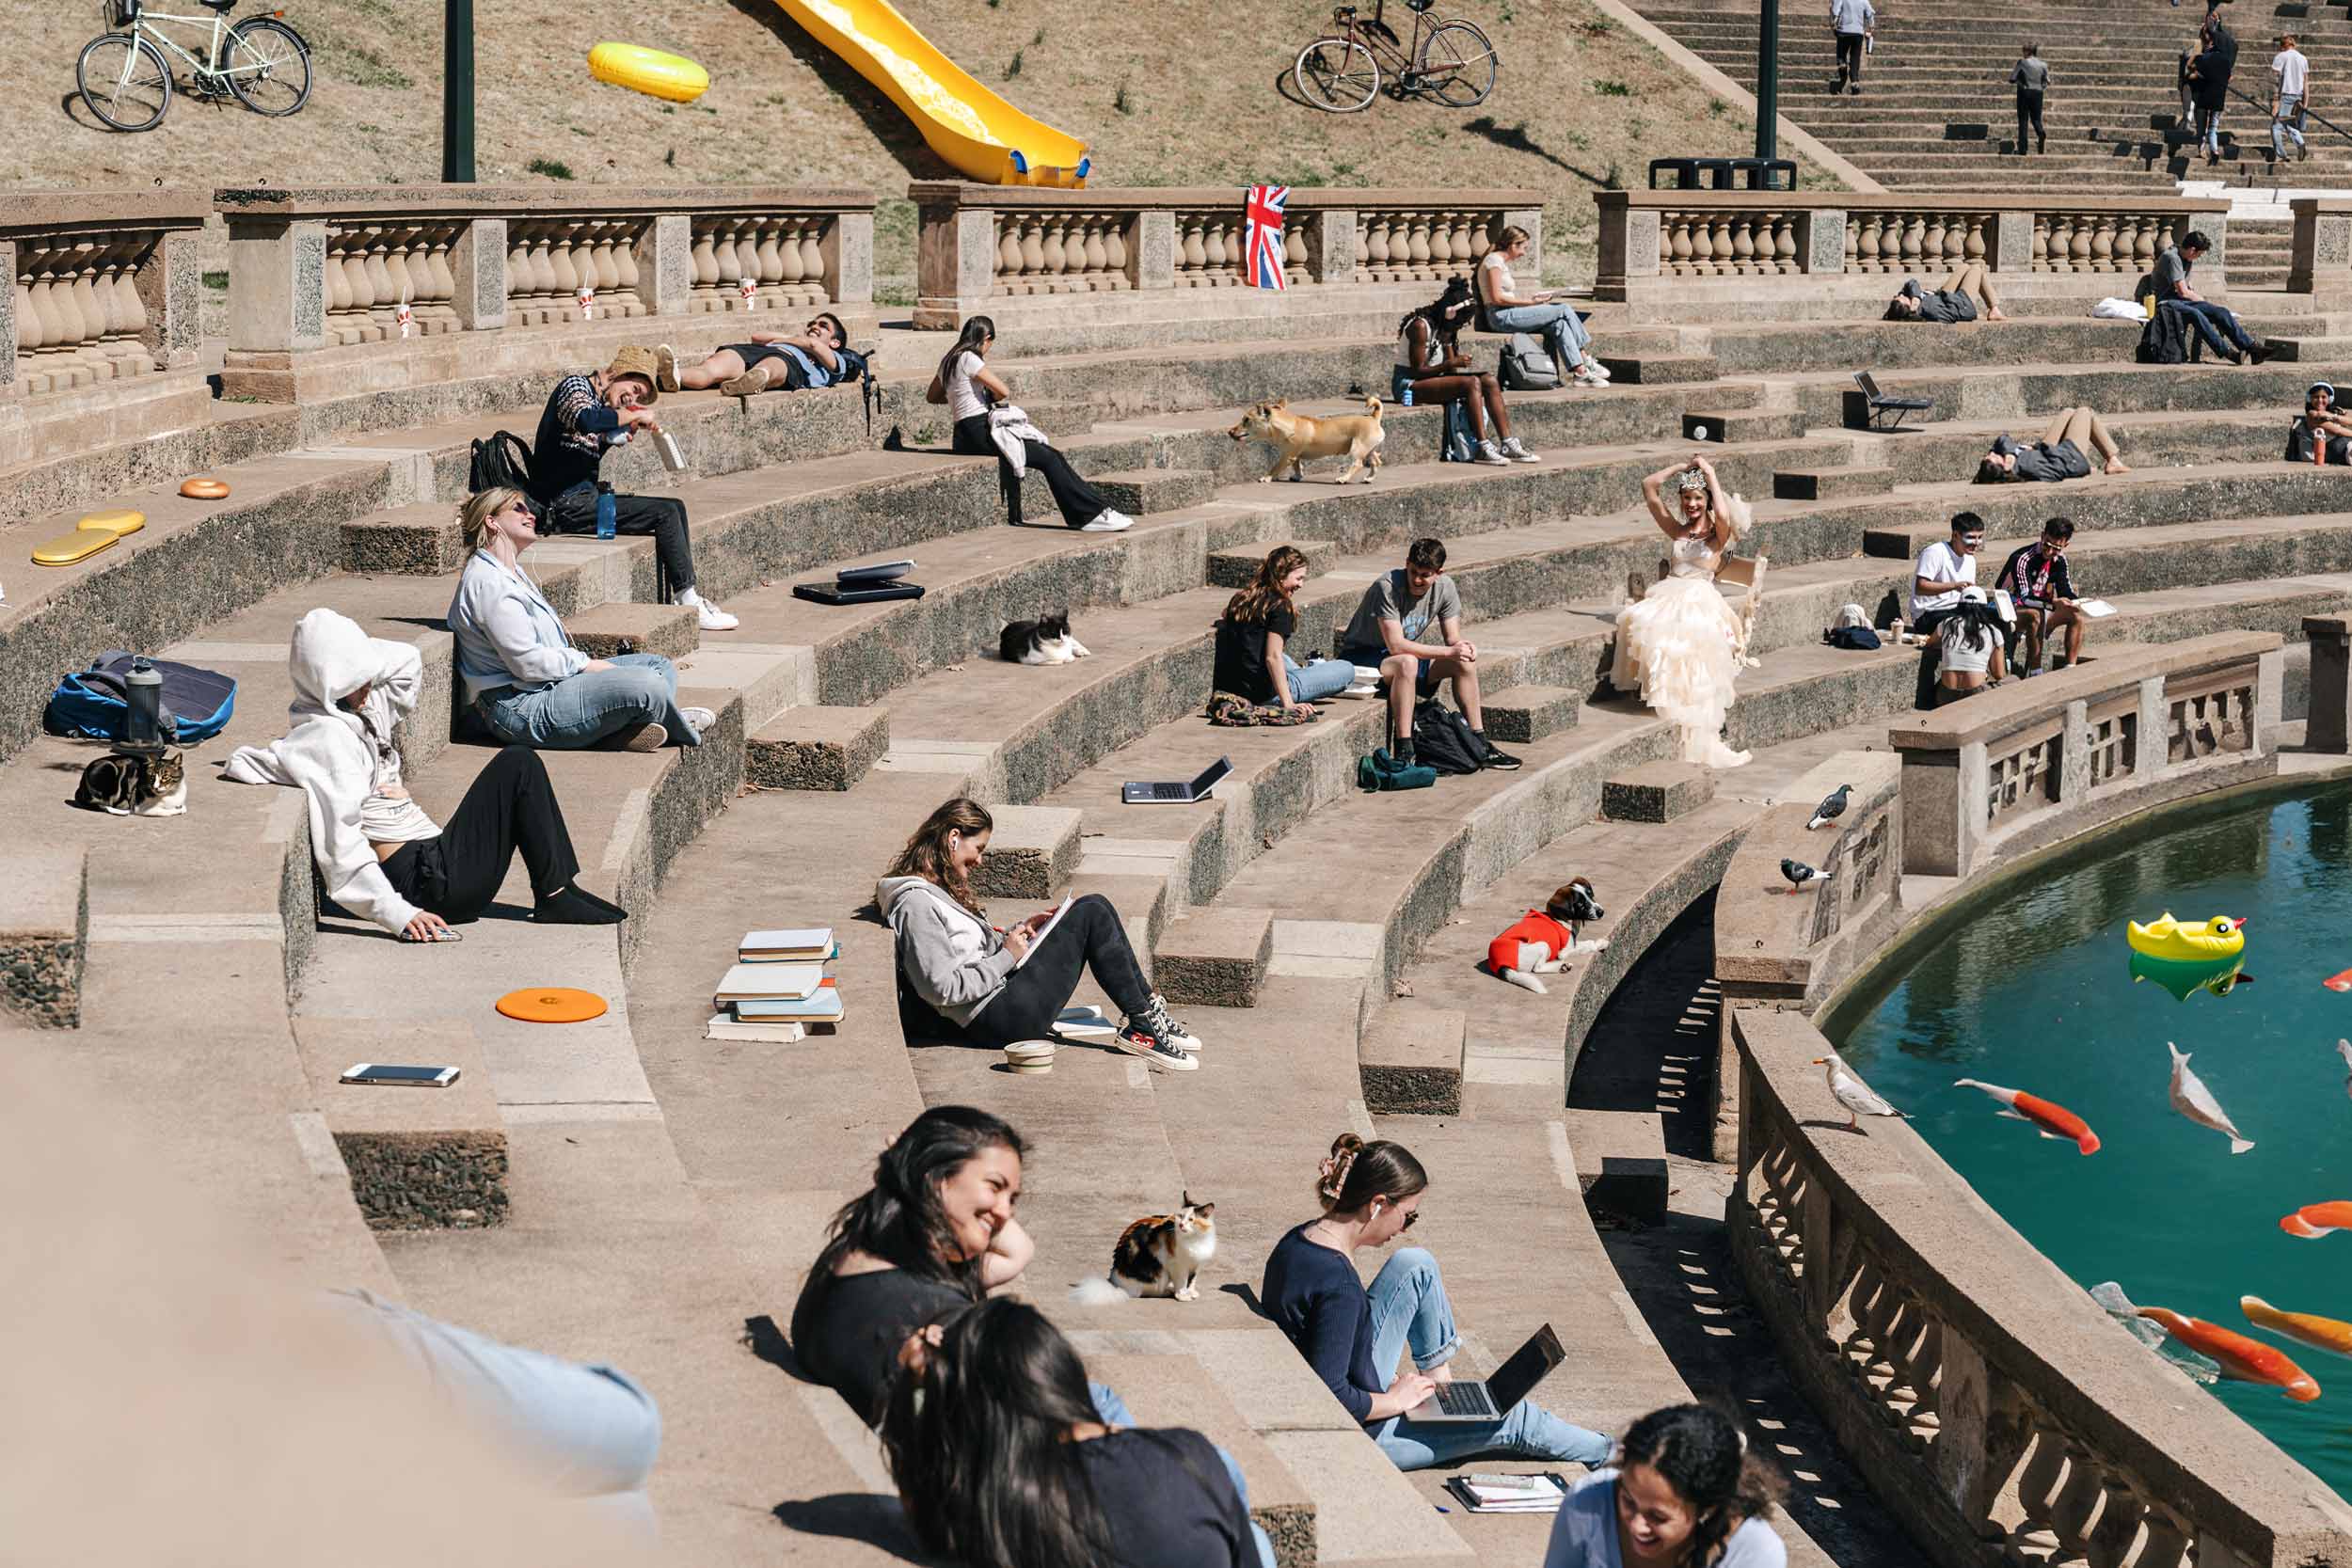 AI edited photo or students sitting in an outdoor amphitheater on a warm spring day on grounds with 25 changes